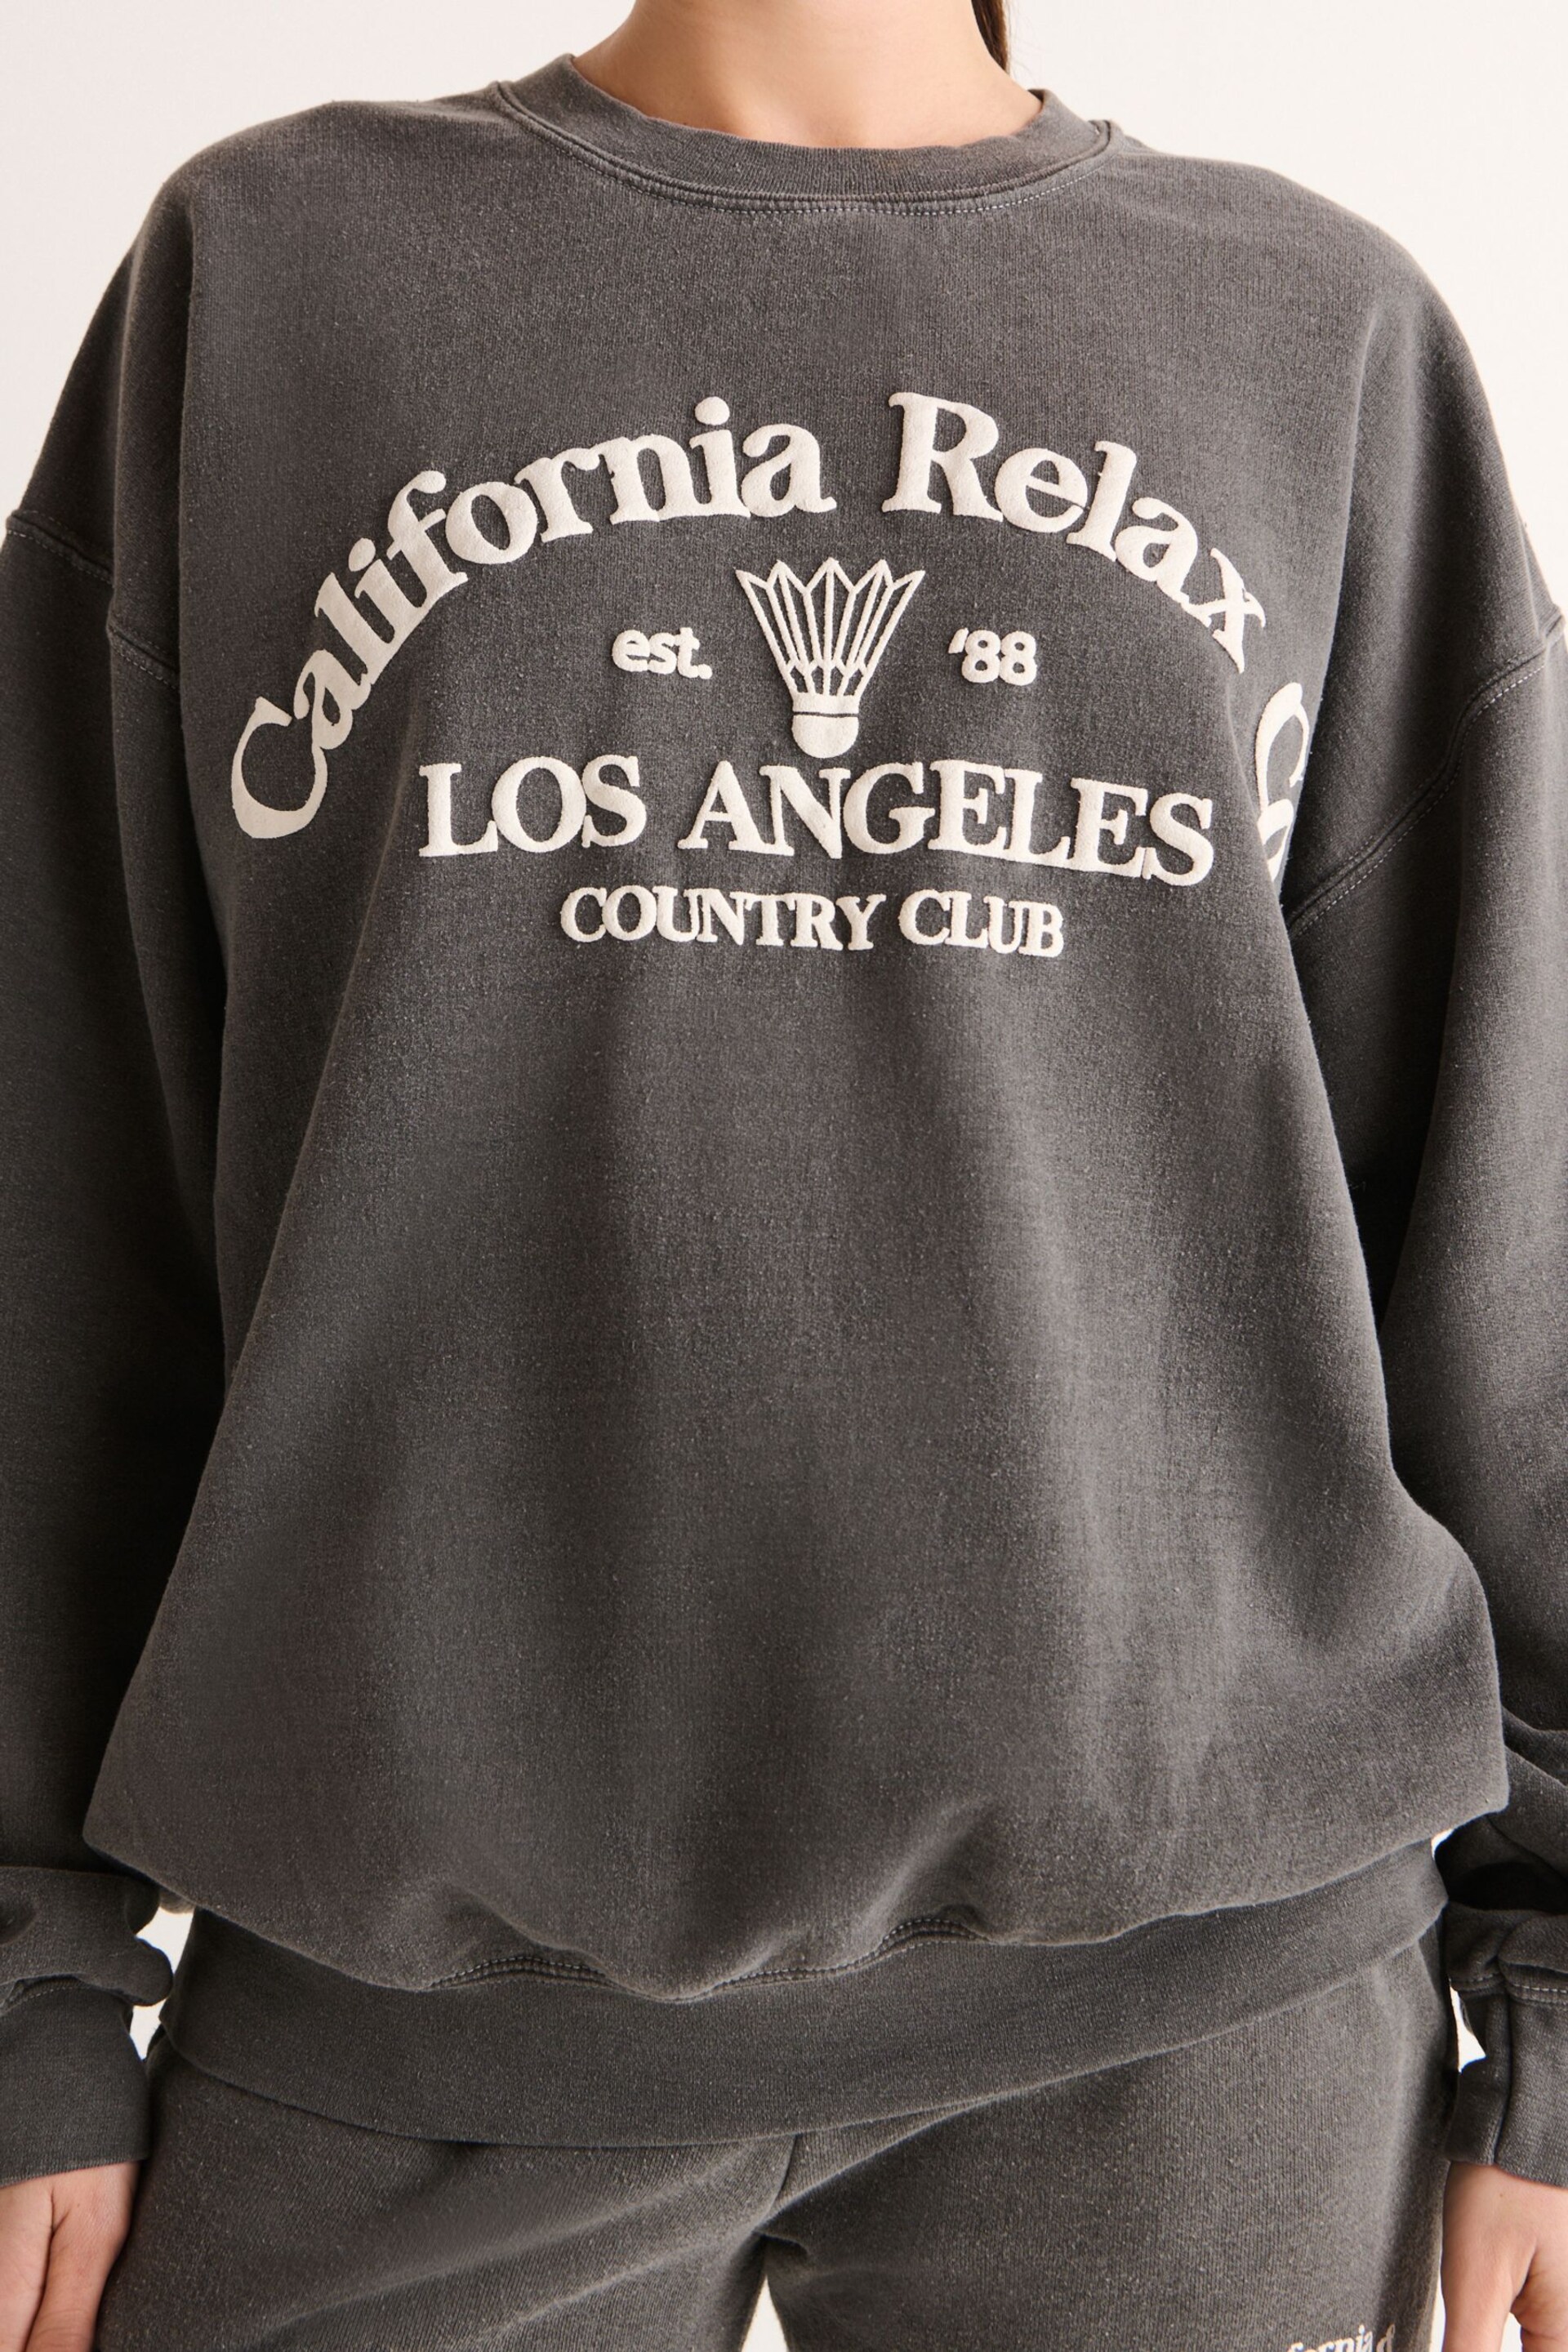 Charcoal Grey Relaxed Fit Oversized Washed California Long Sleeve Graphic Slogan Sweatshirt - Image 4 of 6